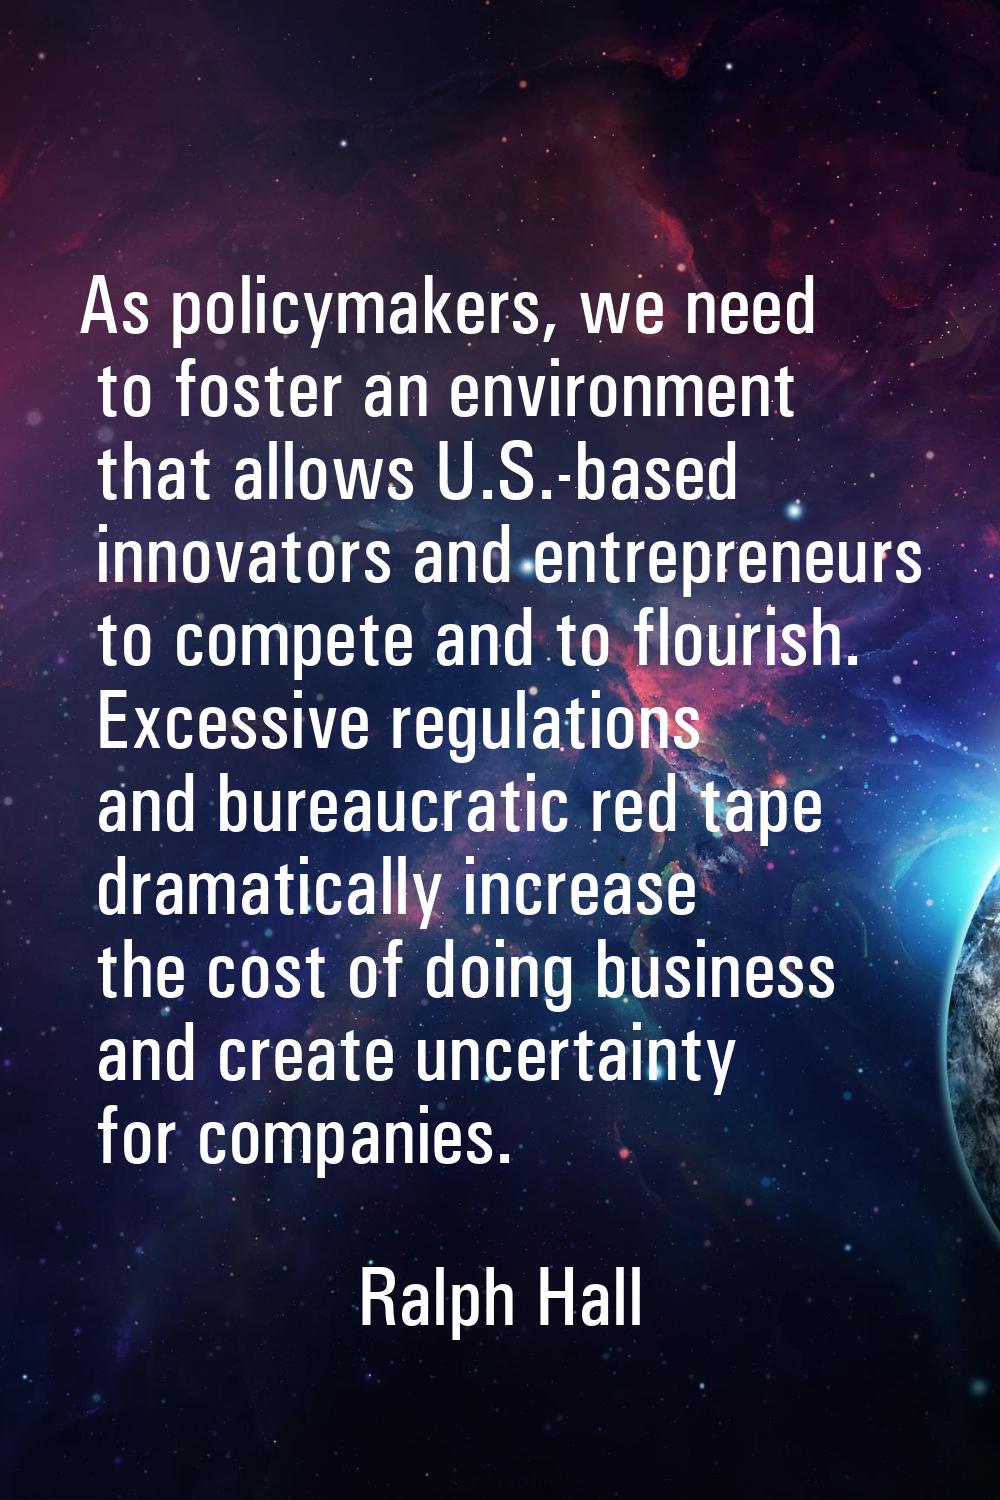 As policymakers, we need to foster an environment that allows U.S.-based innovators and entrepreneu